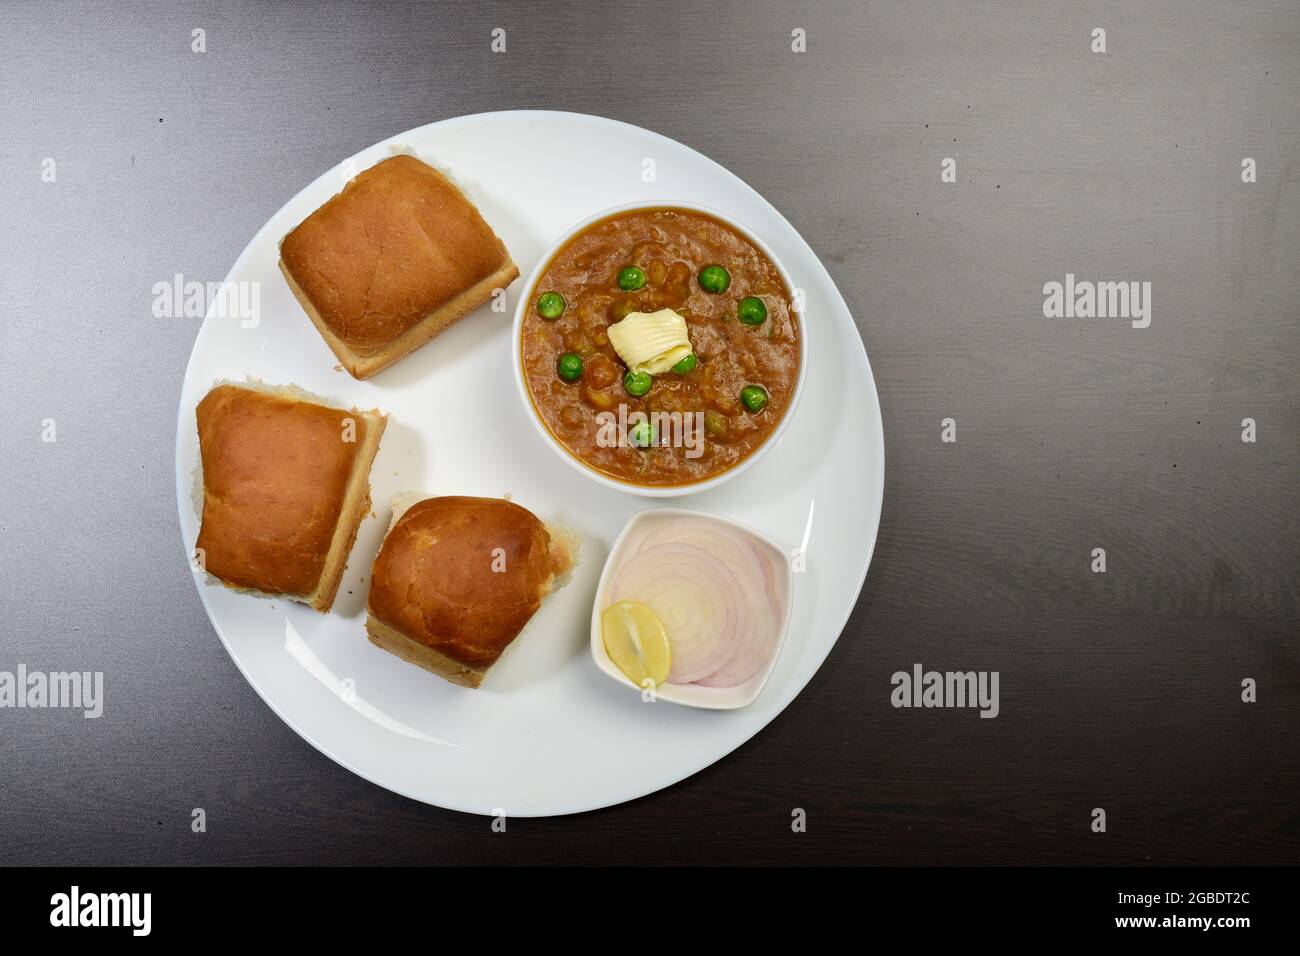 Top view Of Pav Bhaji With Onion Lemon In Plate, Indian Famous Snack Stock Photo